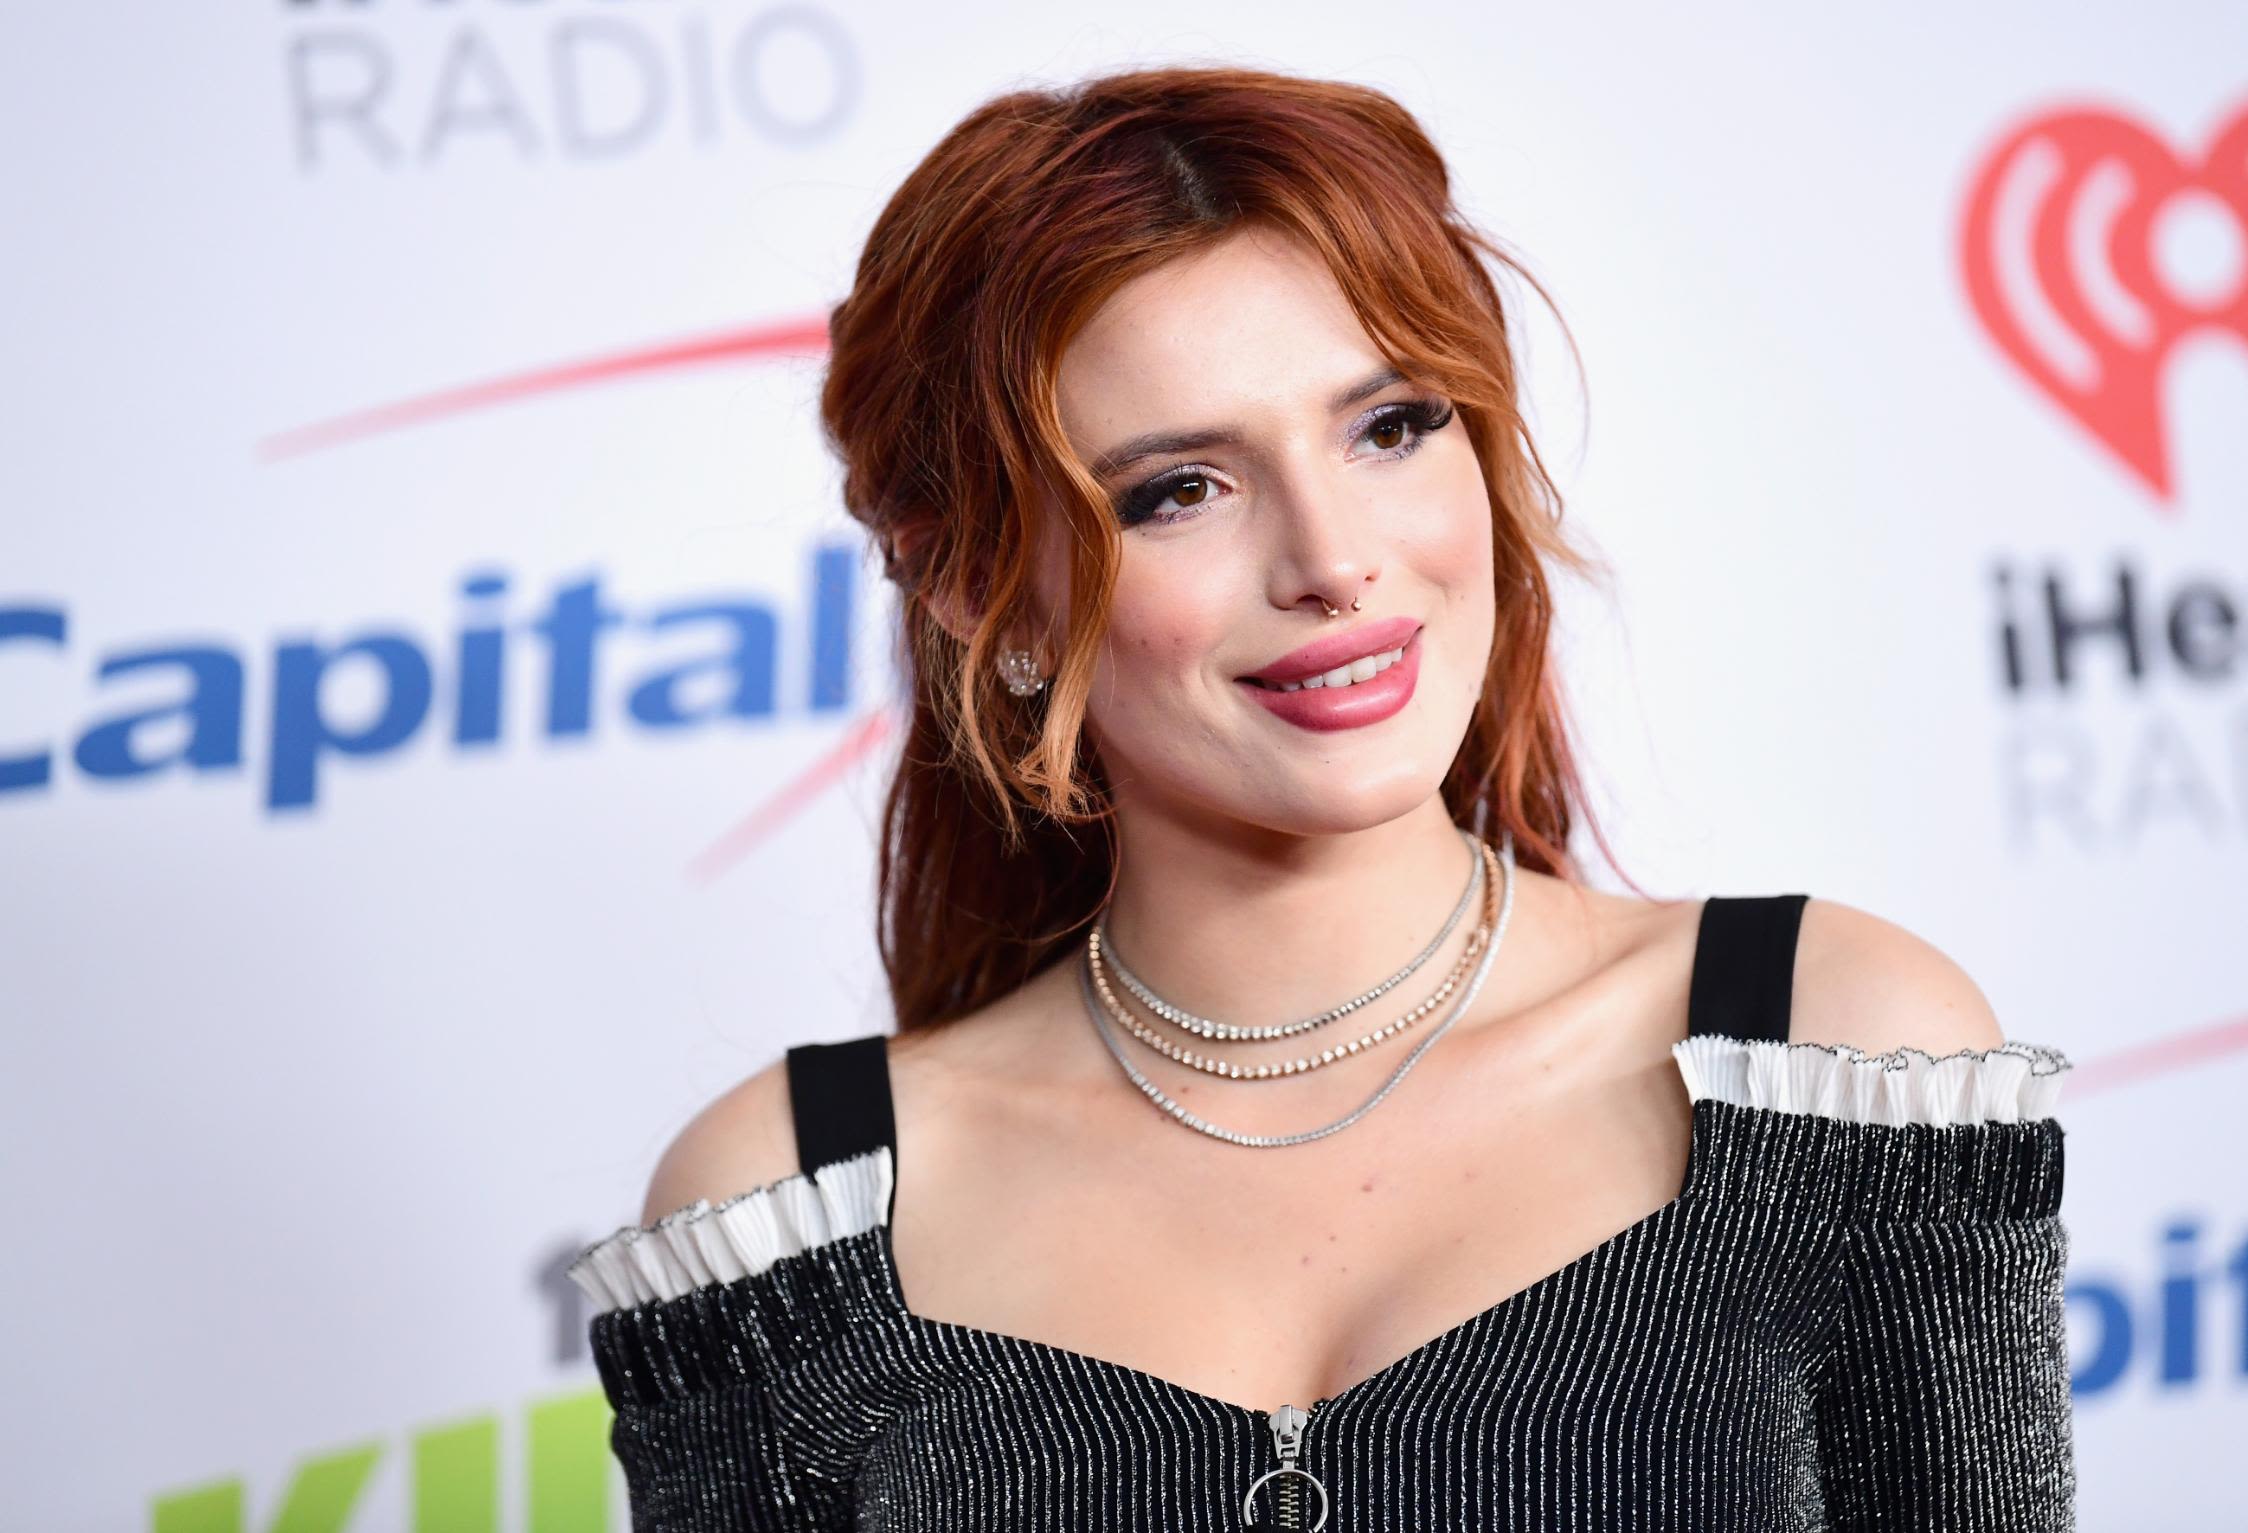 brad caraway share bella thorne nude images photos